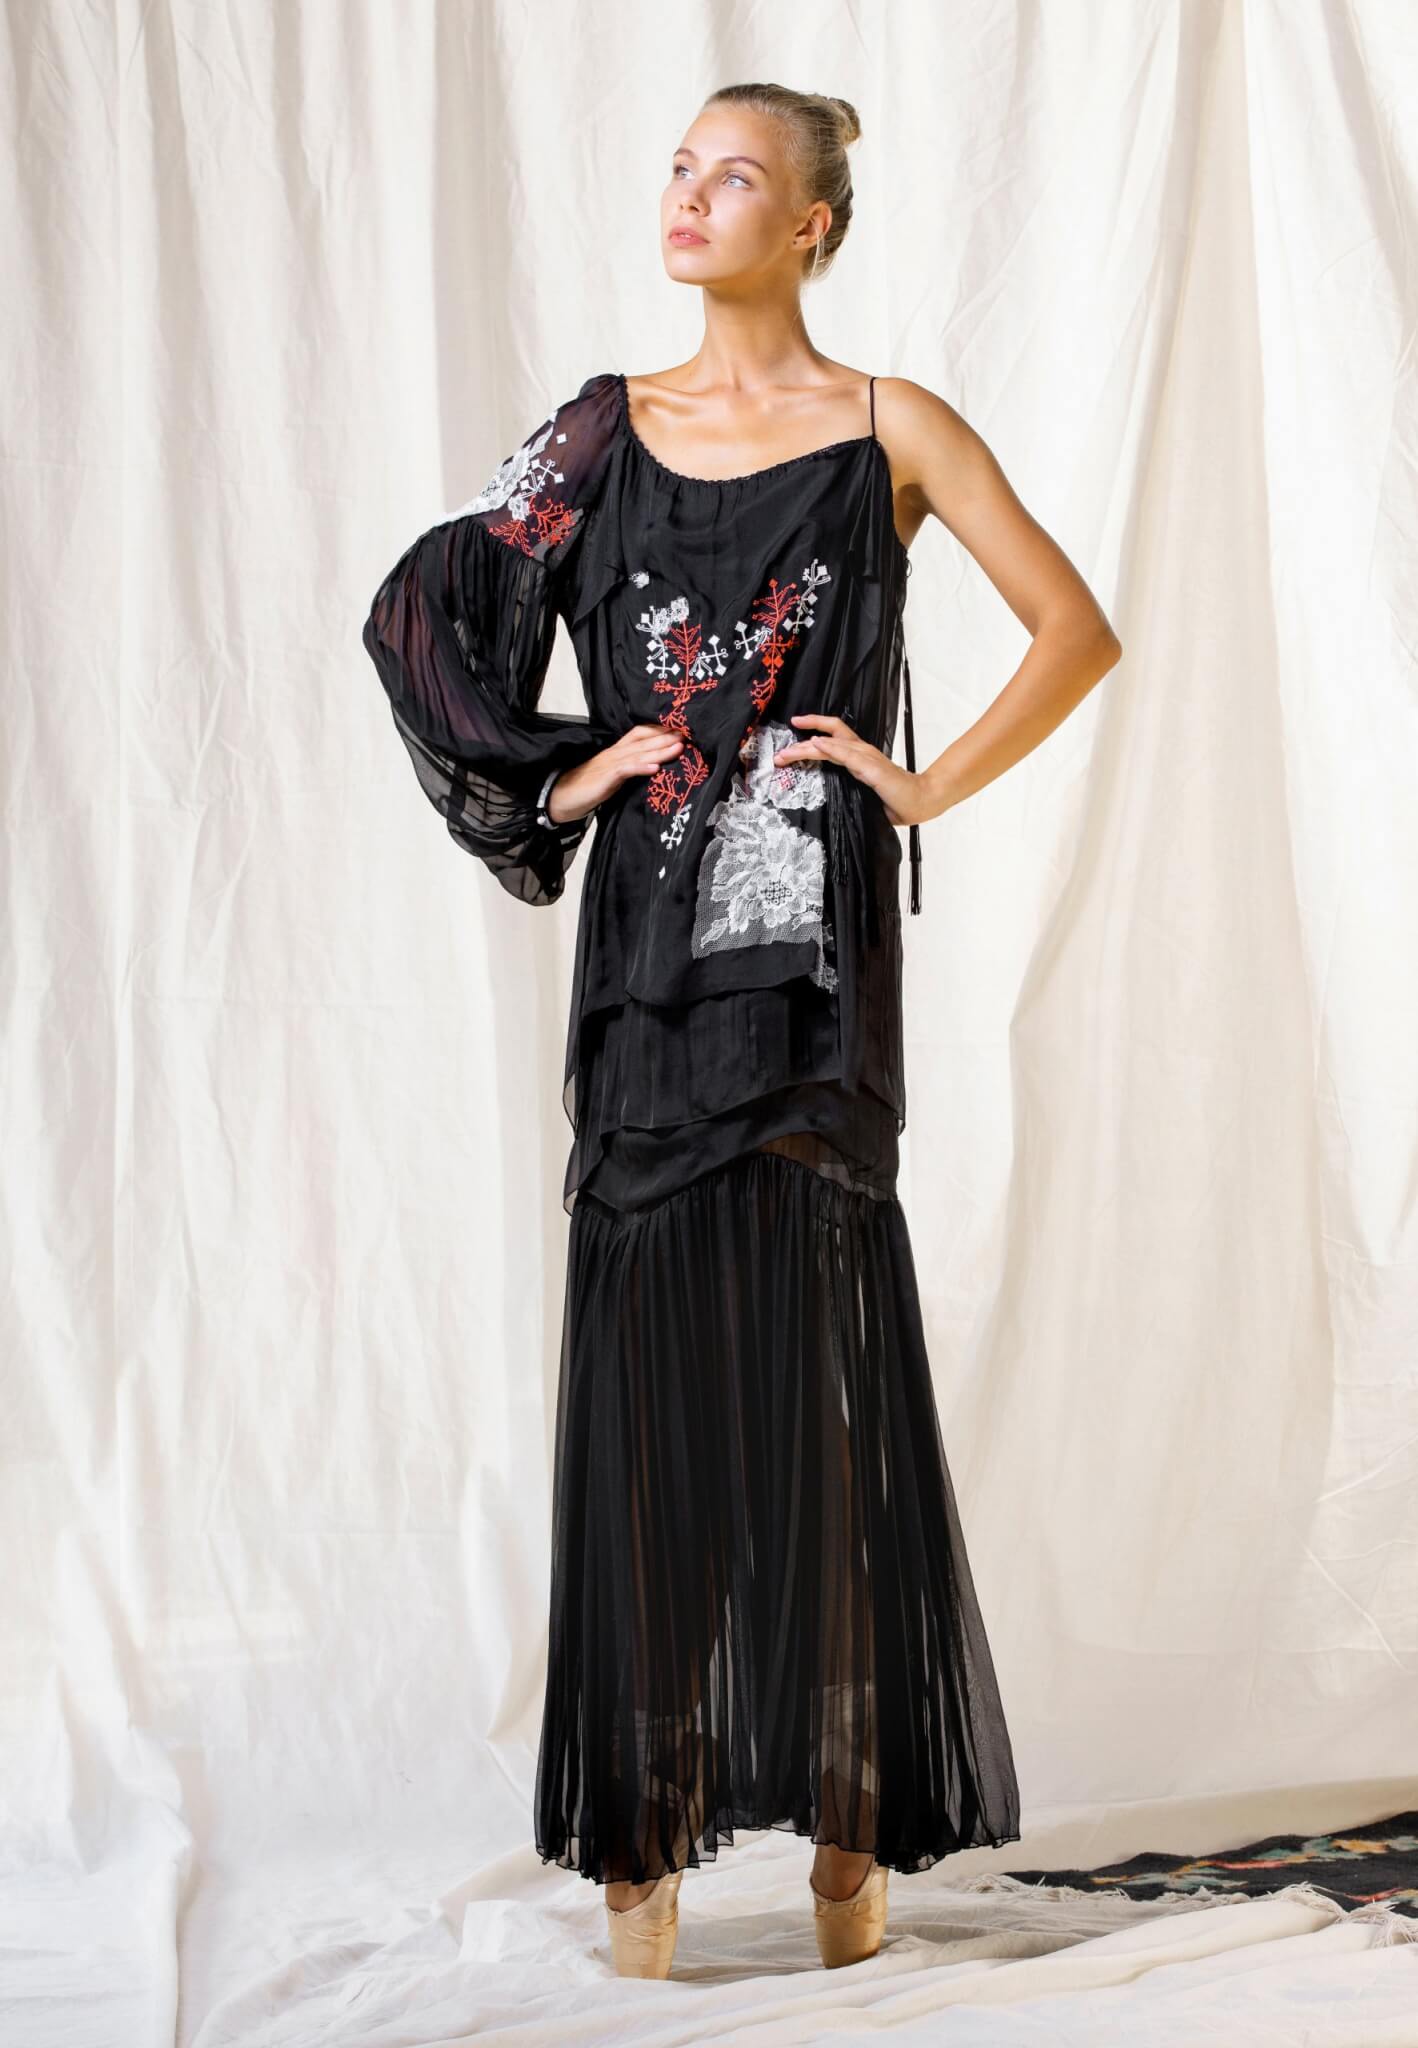 Black silk dress with embroidery